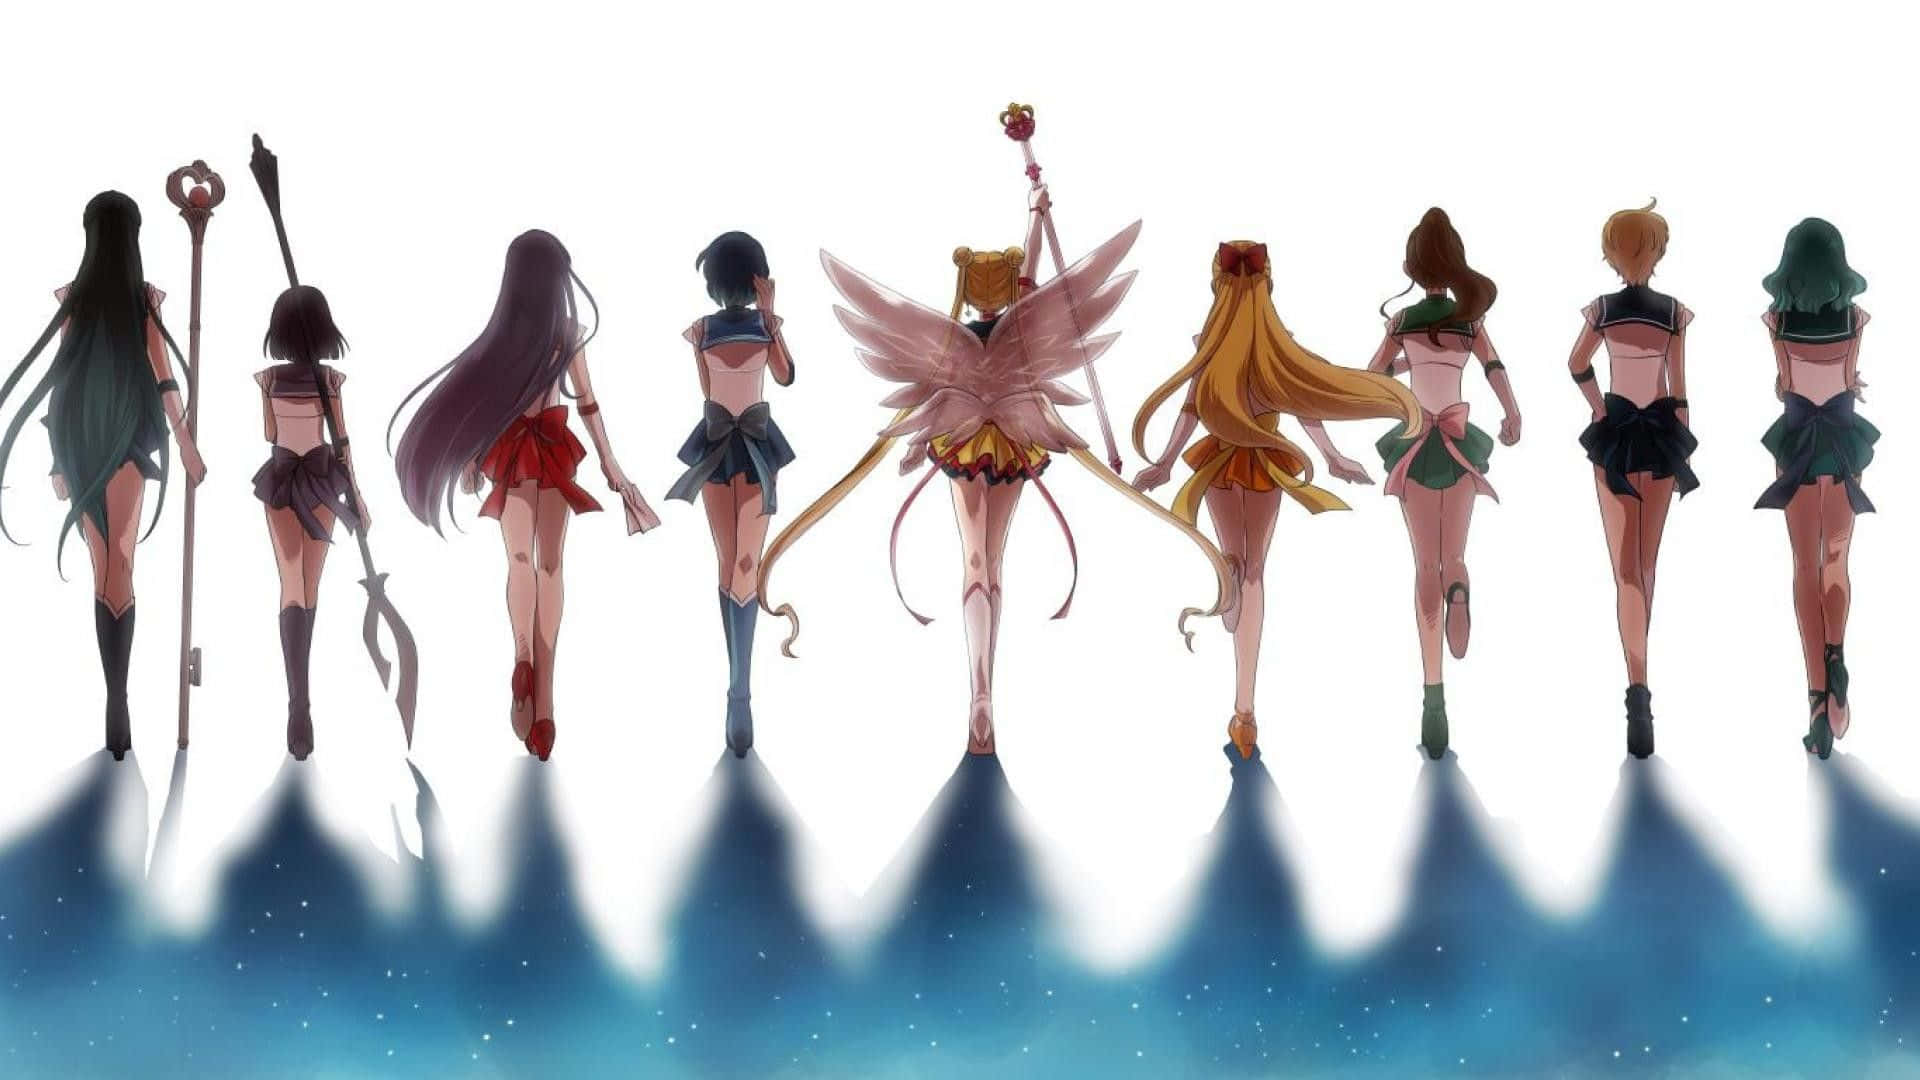 "Sailor Moon in her famous pose, beckoning us to join her in saving the world!" Wallpaper